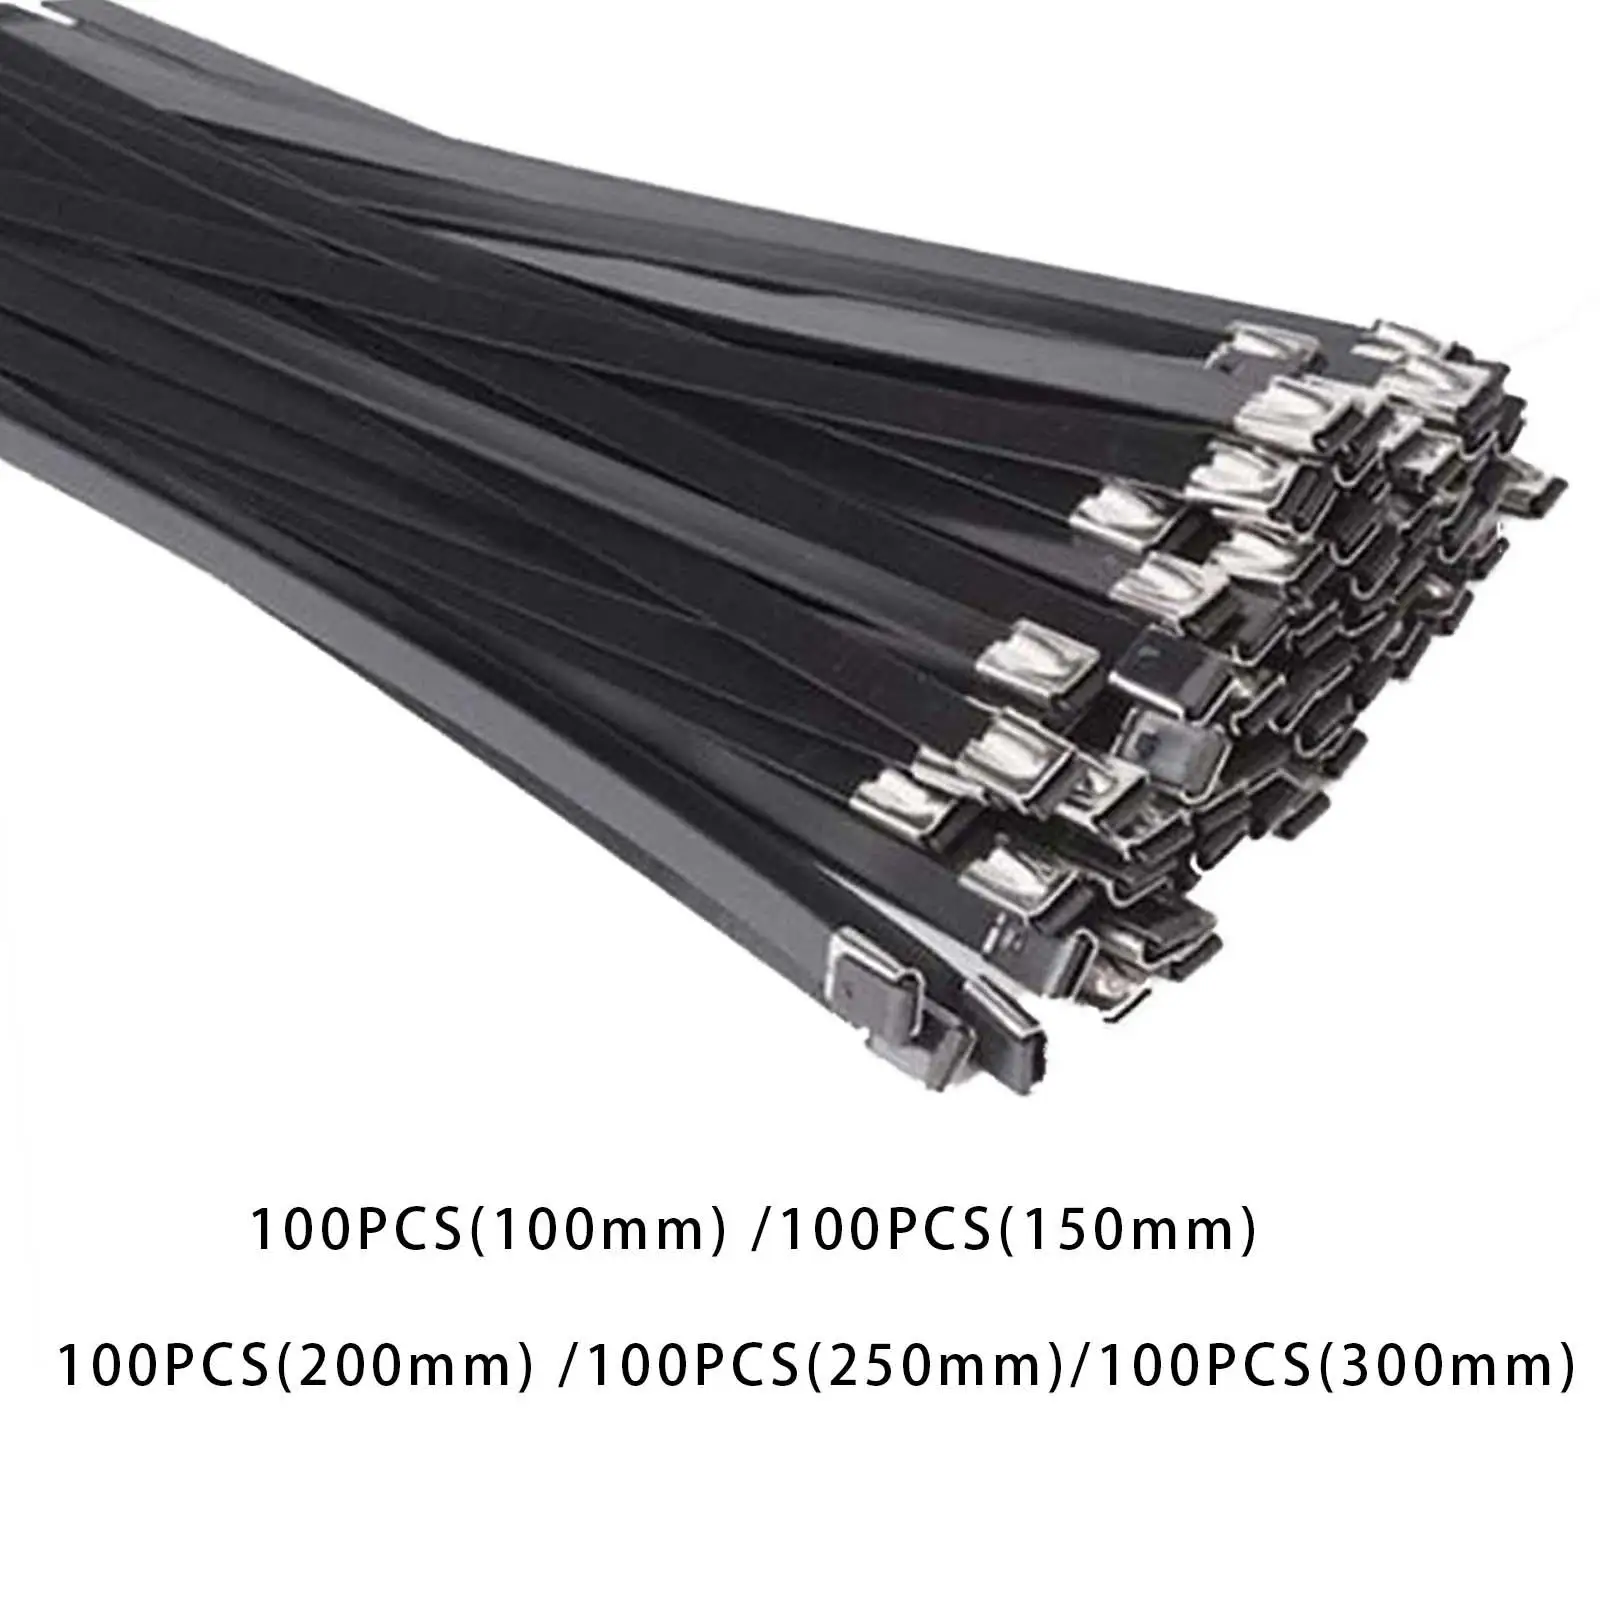 100Pcs 304 Stainless Steel Cable Ties Wrap Coated Practical Sturdy Accessory 4.6mm Width Black Color Versatile for Wire Harness